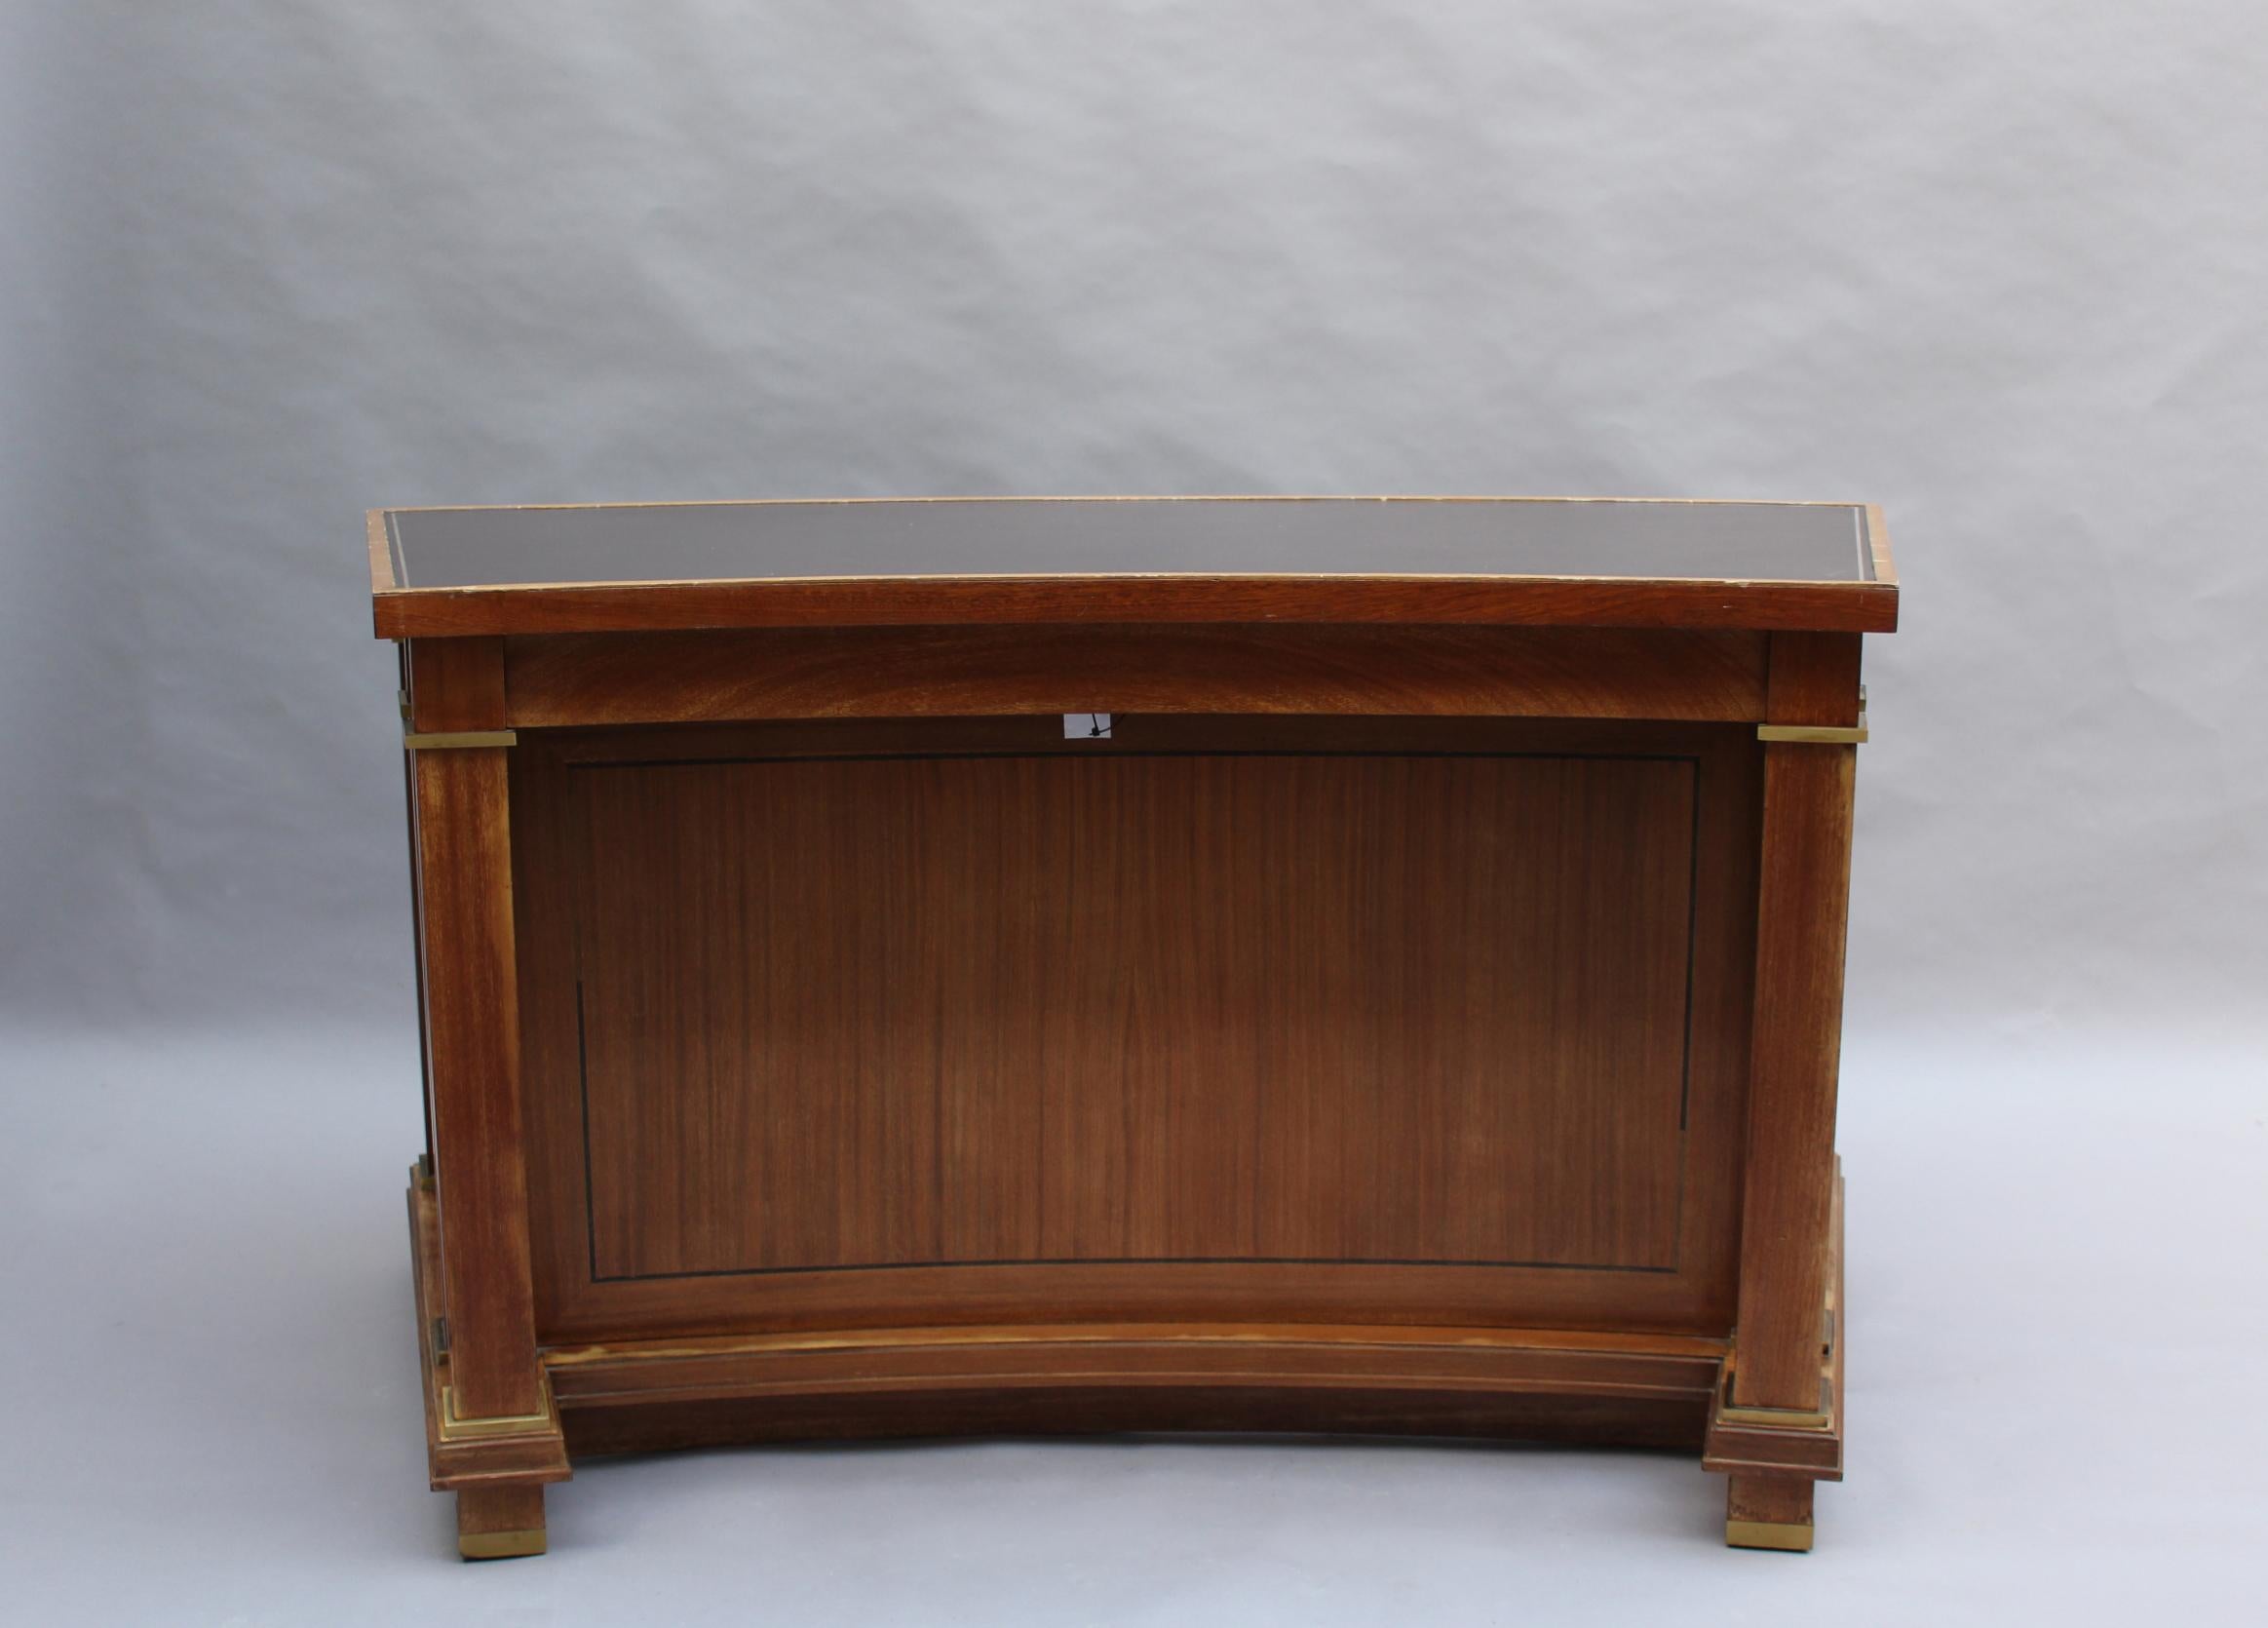 Jacques Adnet: A fine French midcentury mahogany curved desk with a leather top and bronze details.
Provenance: Palais des Consuls of Rouen, France.
2 rectangular desks with a similar design and from the same provenance are also available (ref. #